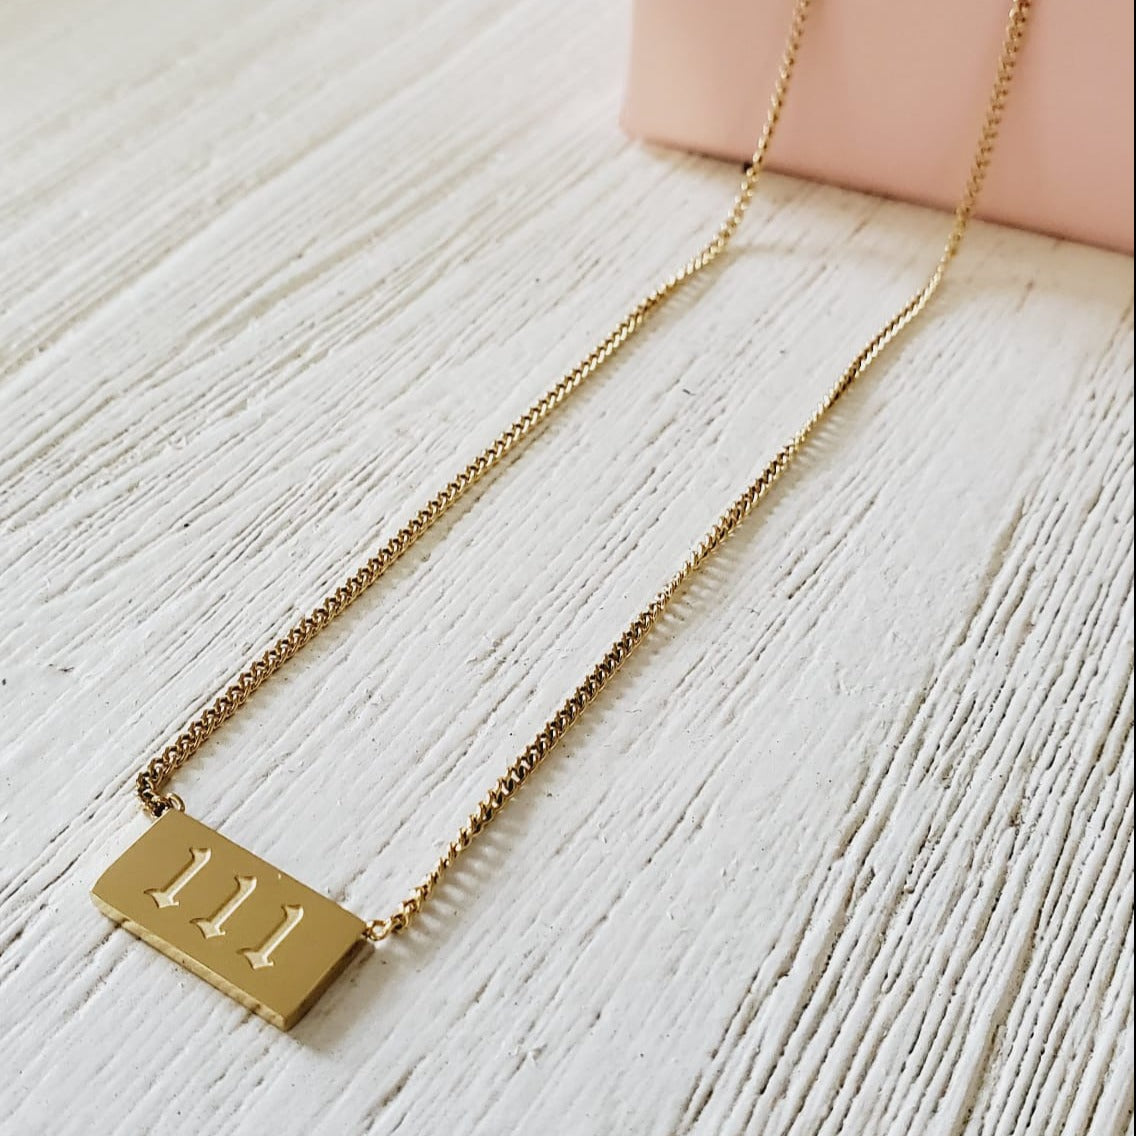 angel numbers necklace, angel numbers jewelry, 111 necklace, 111 jewelry, 222 necklace, 222 jewelry, 333 necklace, 333 jewelry, 444 necklace, 444 jewelry, 555 necklace, 555 jewelry, 777 necklace, 777 jewelry, 888 necklace, 888 jewelry, 999 necklace, 999 jewelry, 000 necklace, 000 jewelry, manifestation jewelry, manifestation necklace, abundance necklace, abundance jewelry, spiritual jewelry, spiritual necklace, make a wish necklace, new beginnings necklace